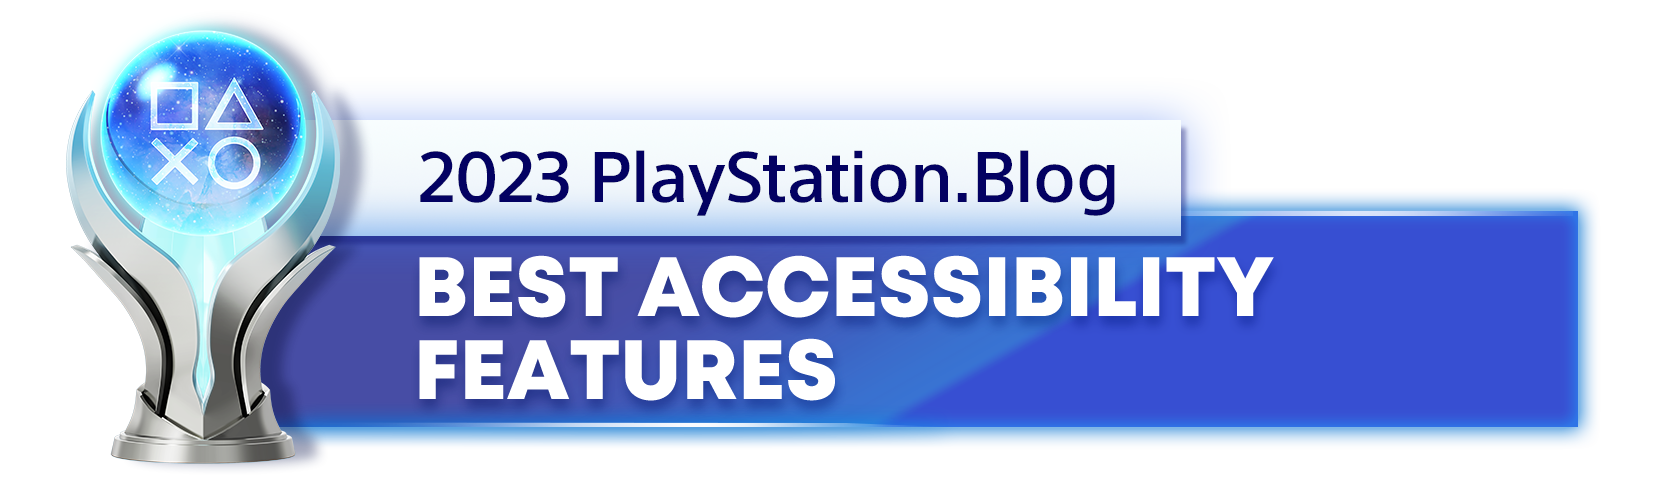  "Platinum Trophy for the 2023 PlayStation Blog Best Accessibility Features Winner"